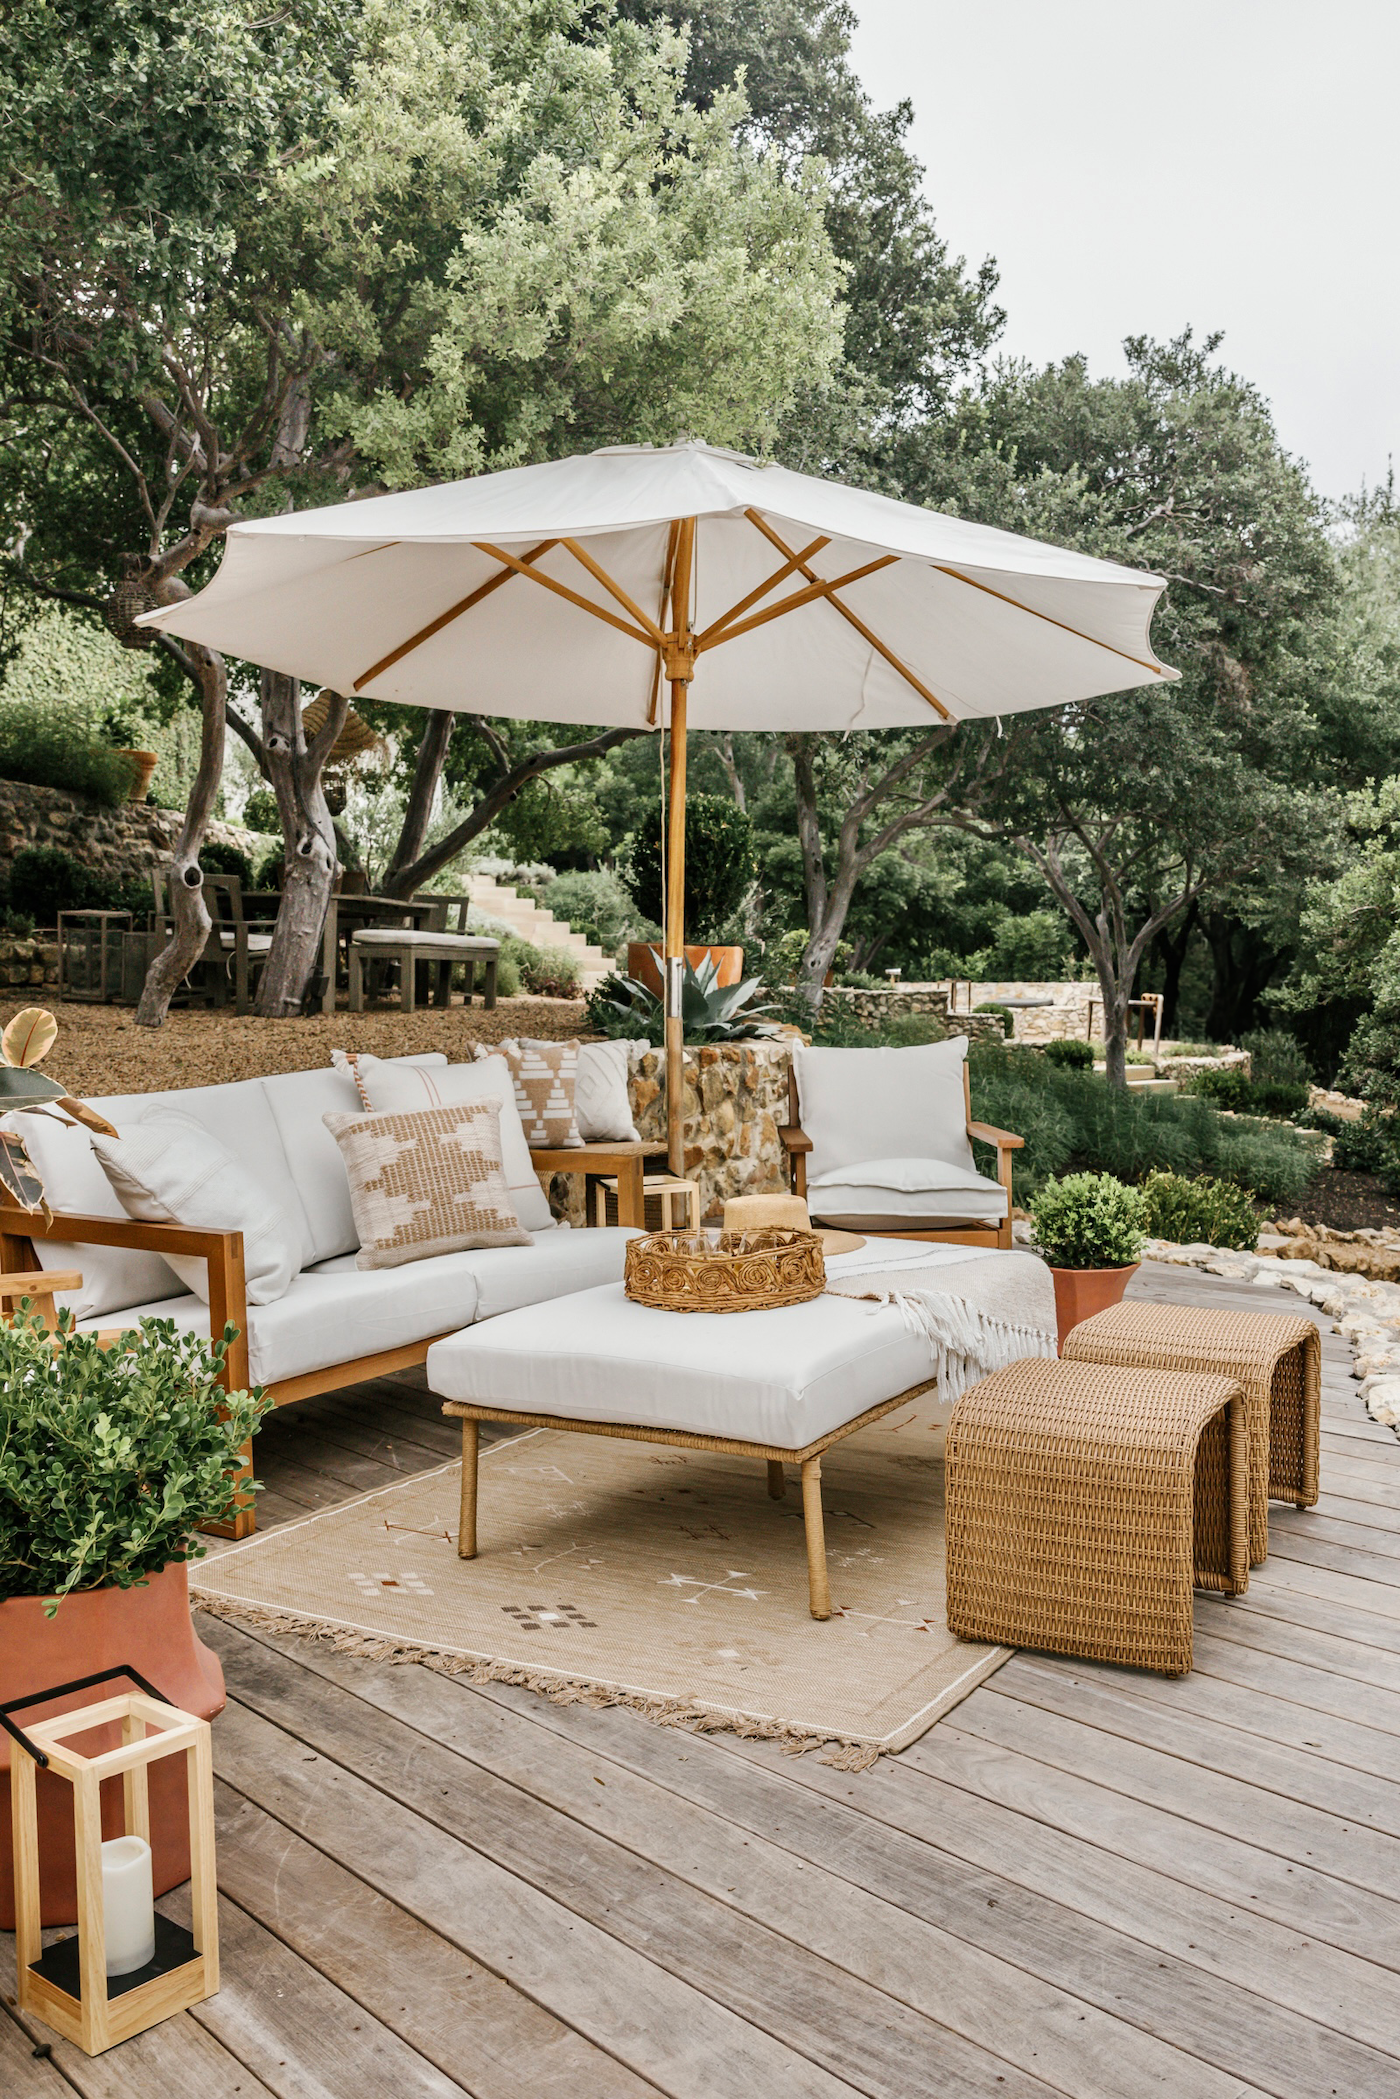 target-affordable-backyard-design-camille-styles-31